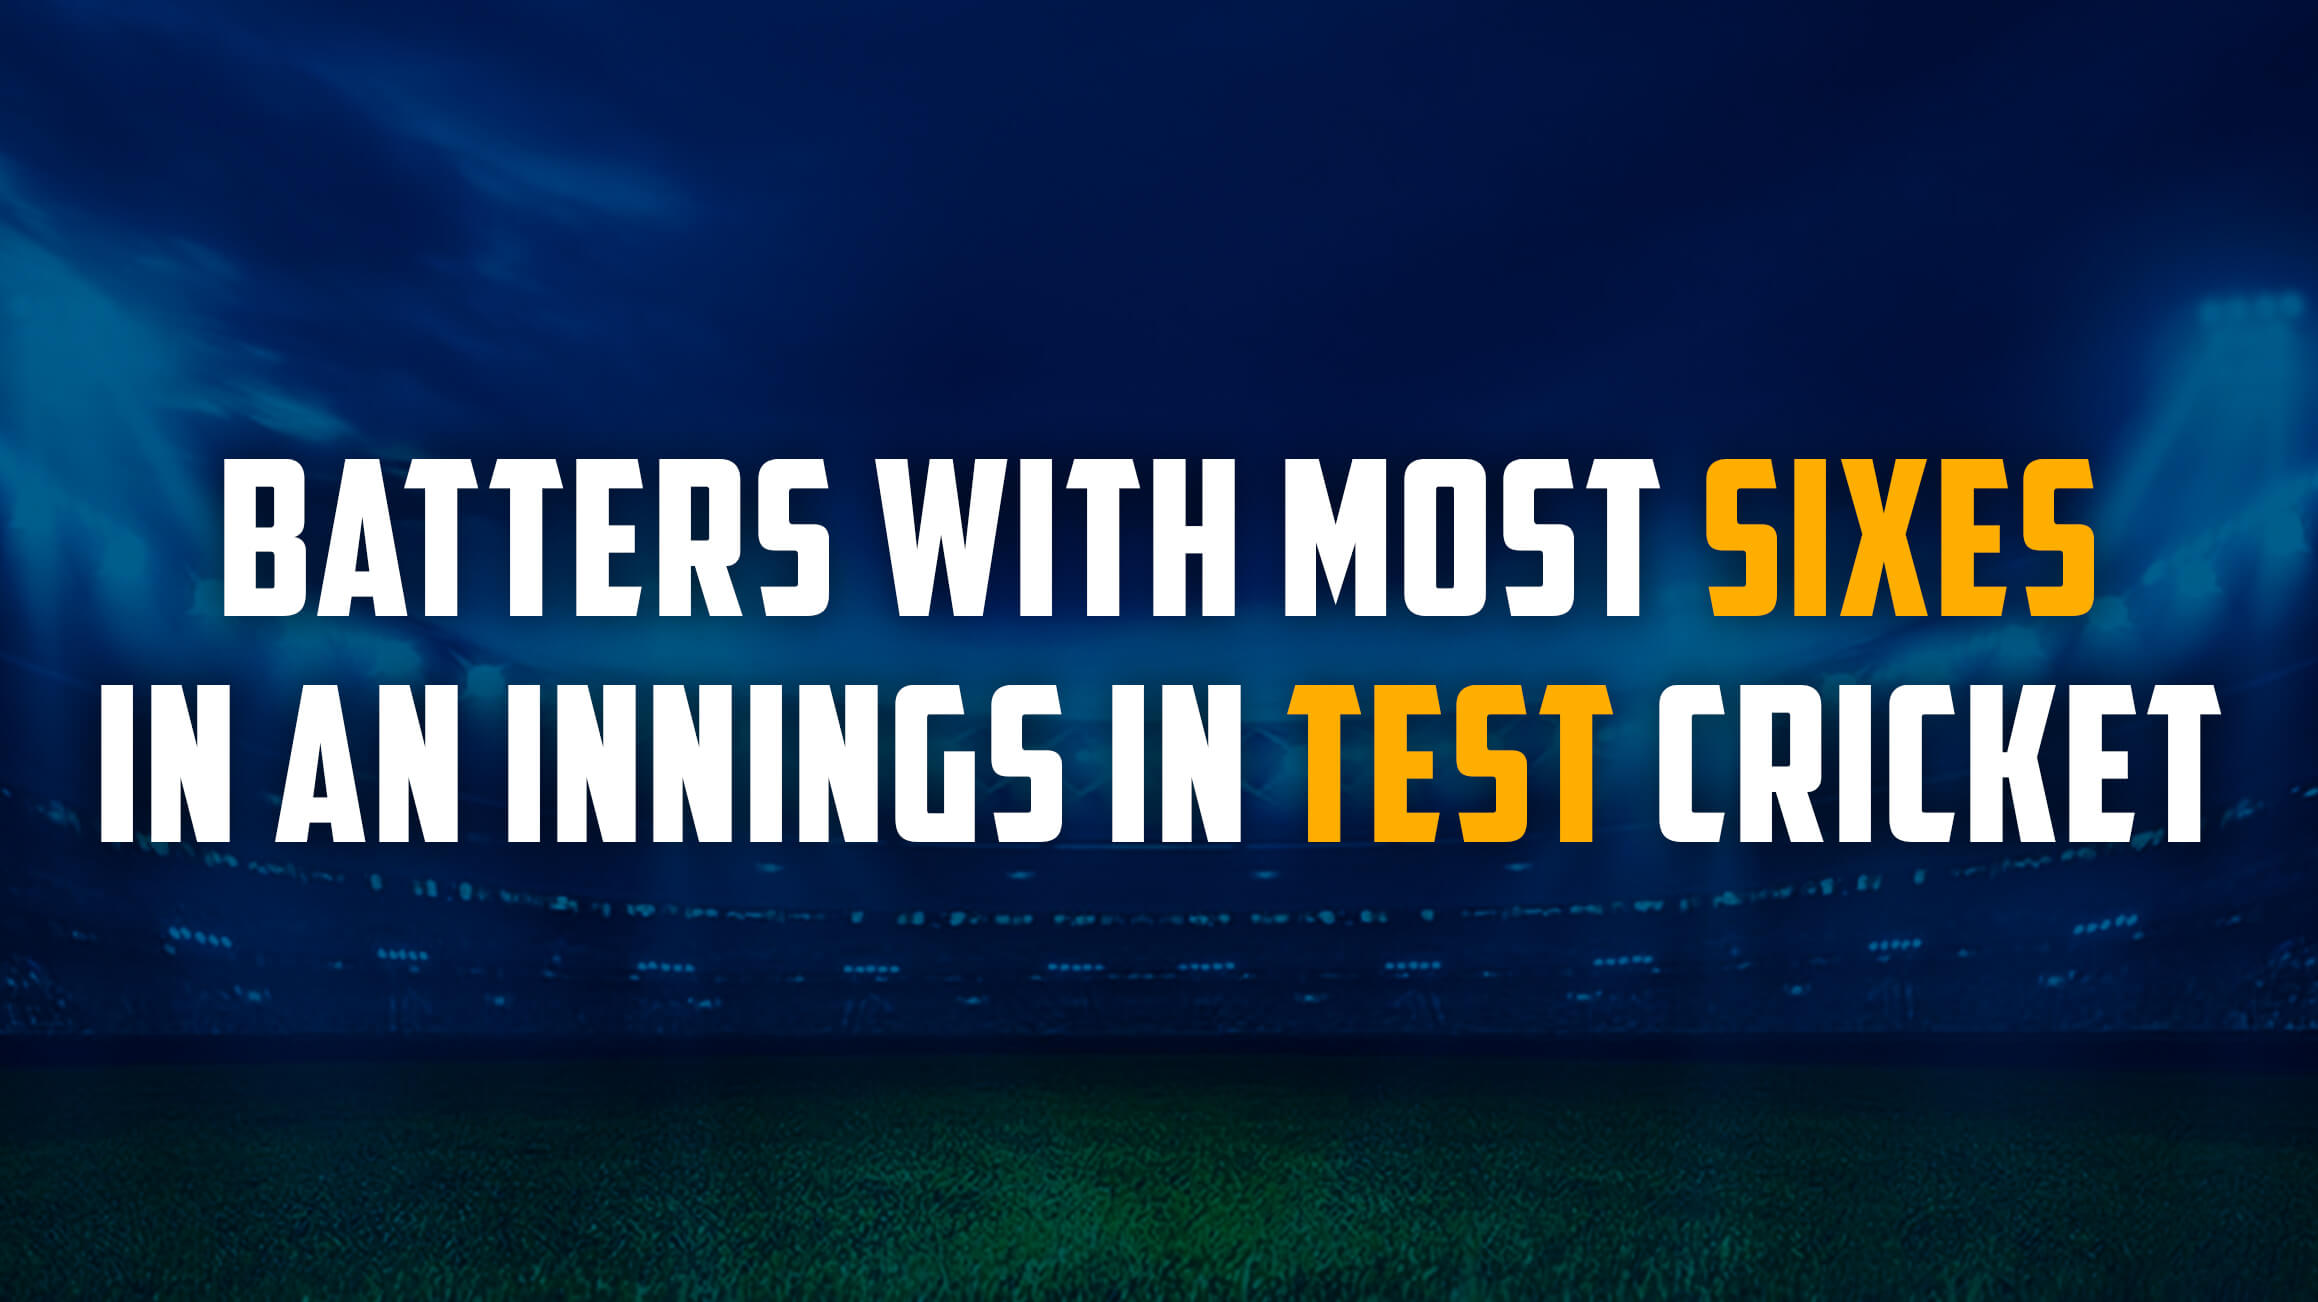 Who has hit the most sixes in a Test innings?